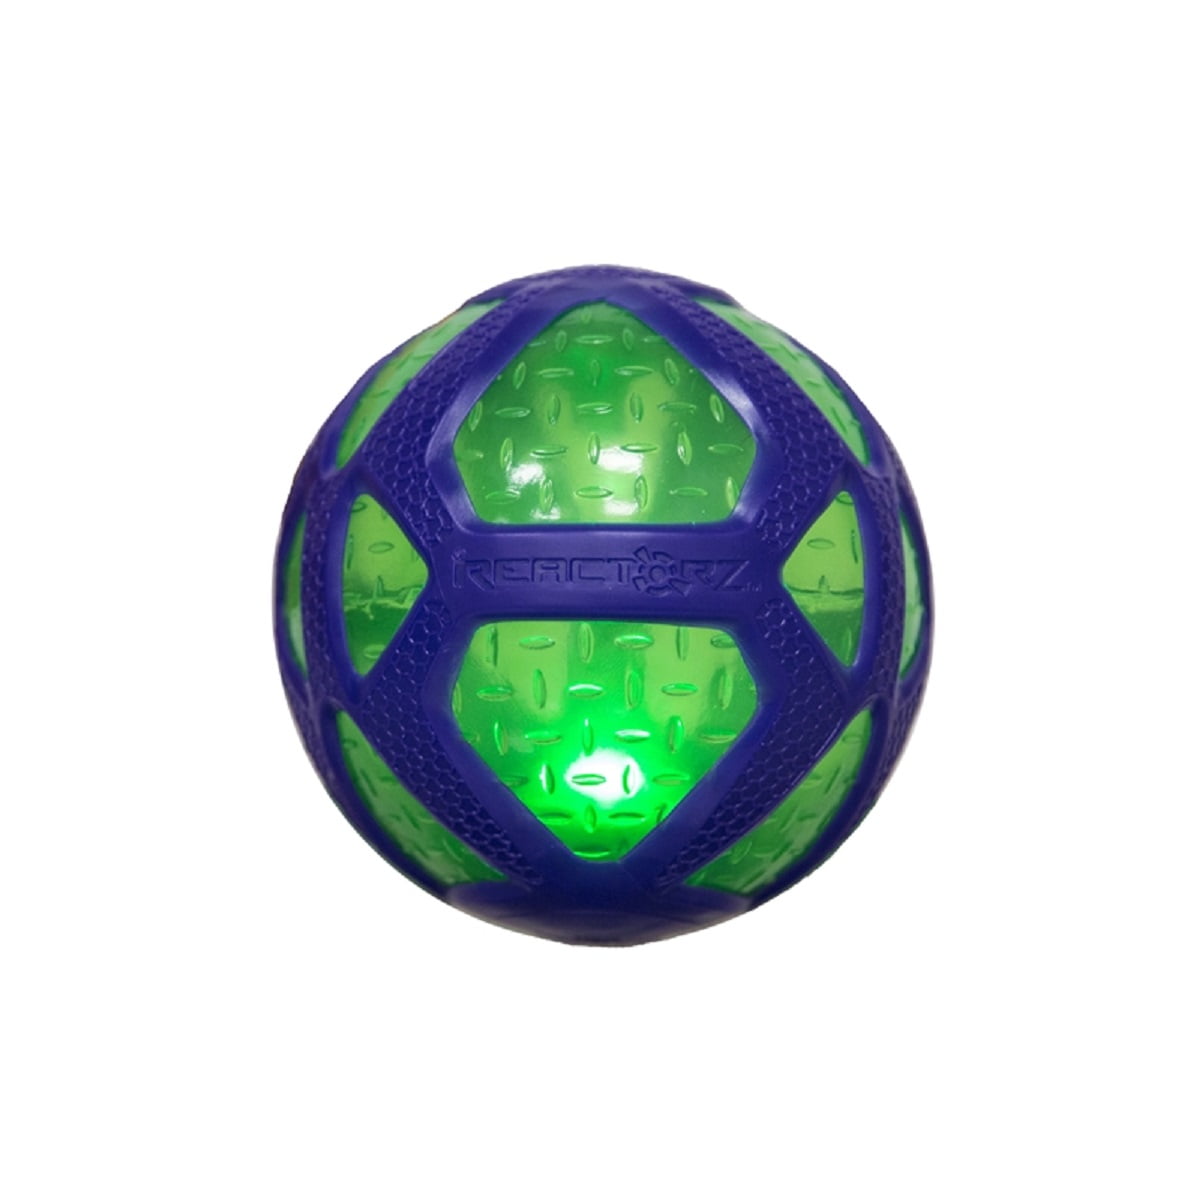 Reactorz Light Up Micro Football Light Up Your Game New